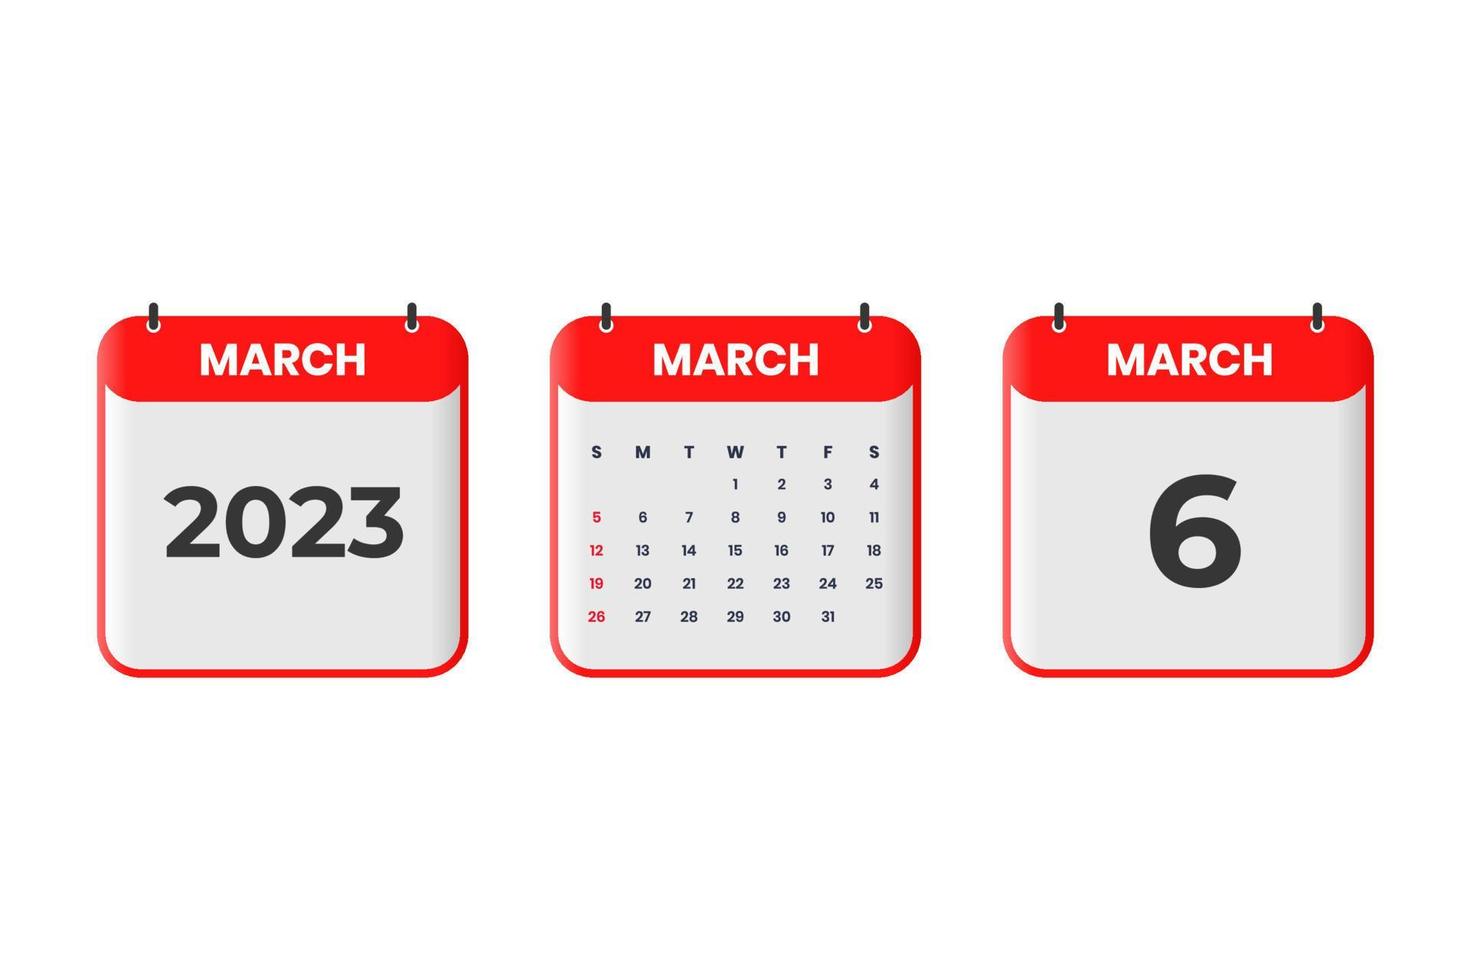 March 2023 calendar design. 6th March 2023 calendar icon for schedule, appointment, important date concept vector